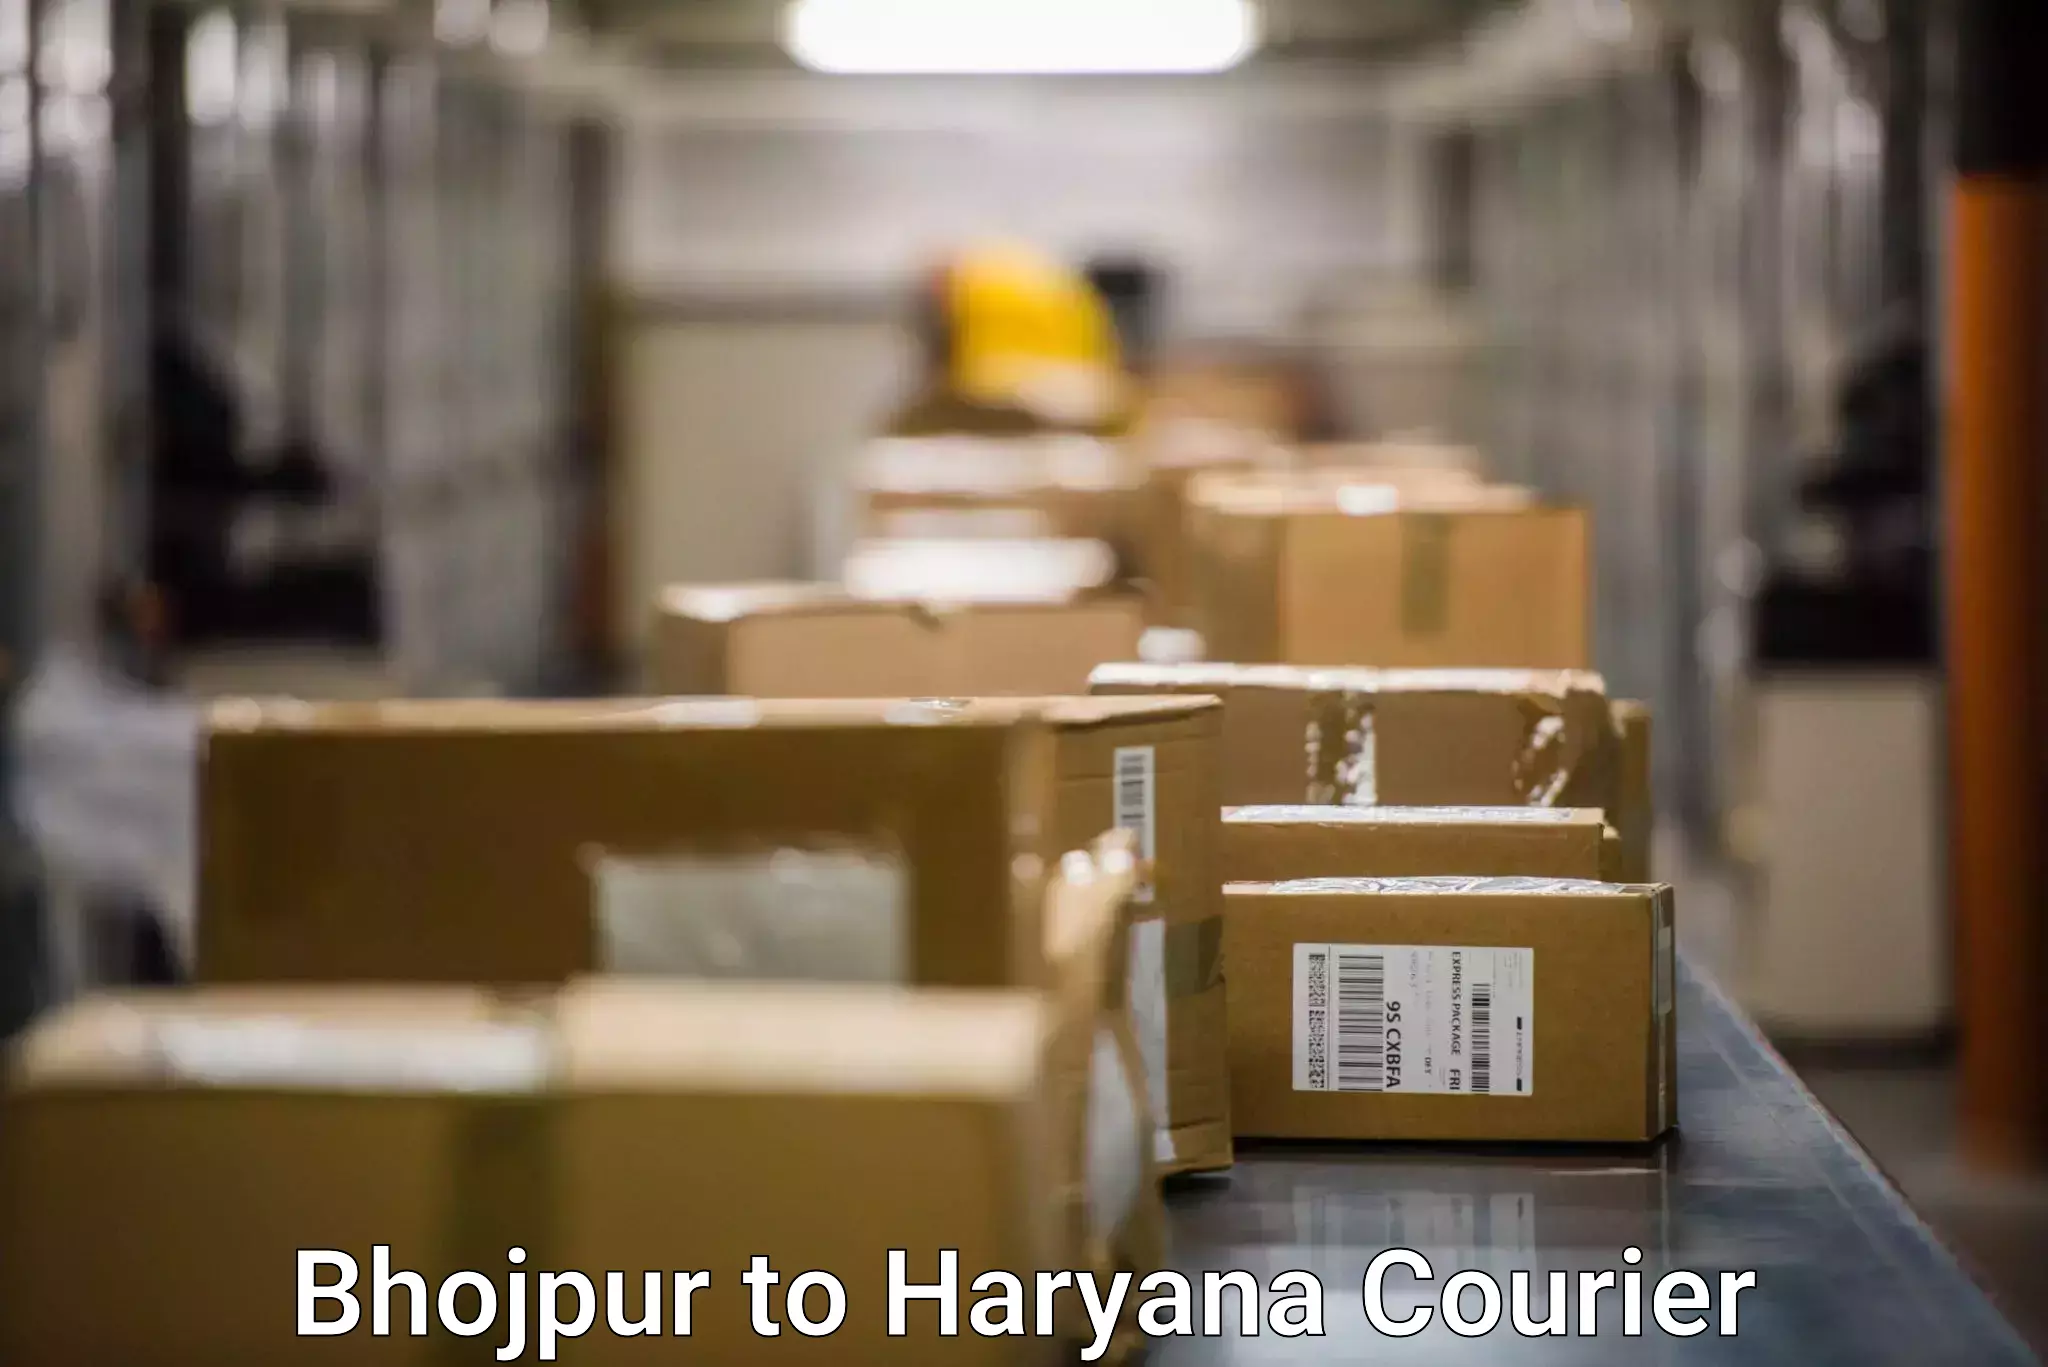 Speedy delivery service Bhojpur to Panchkula